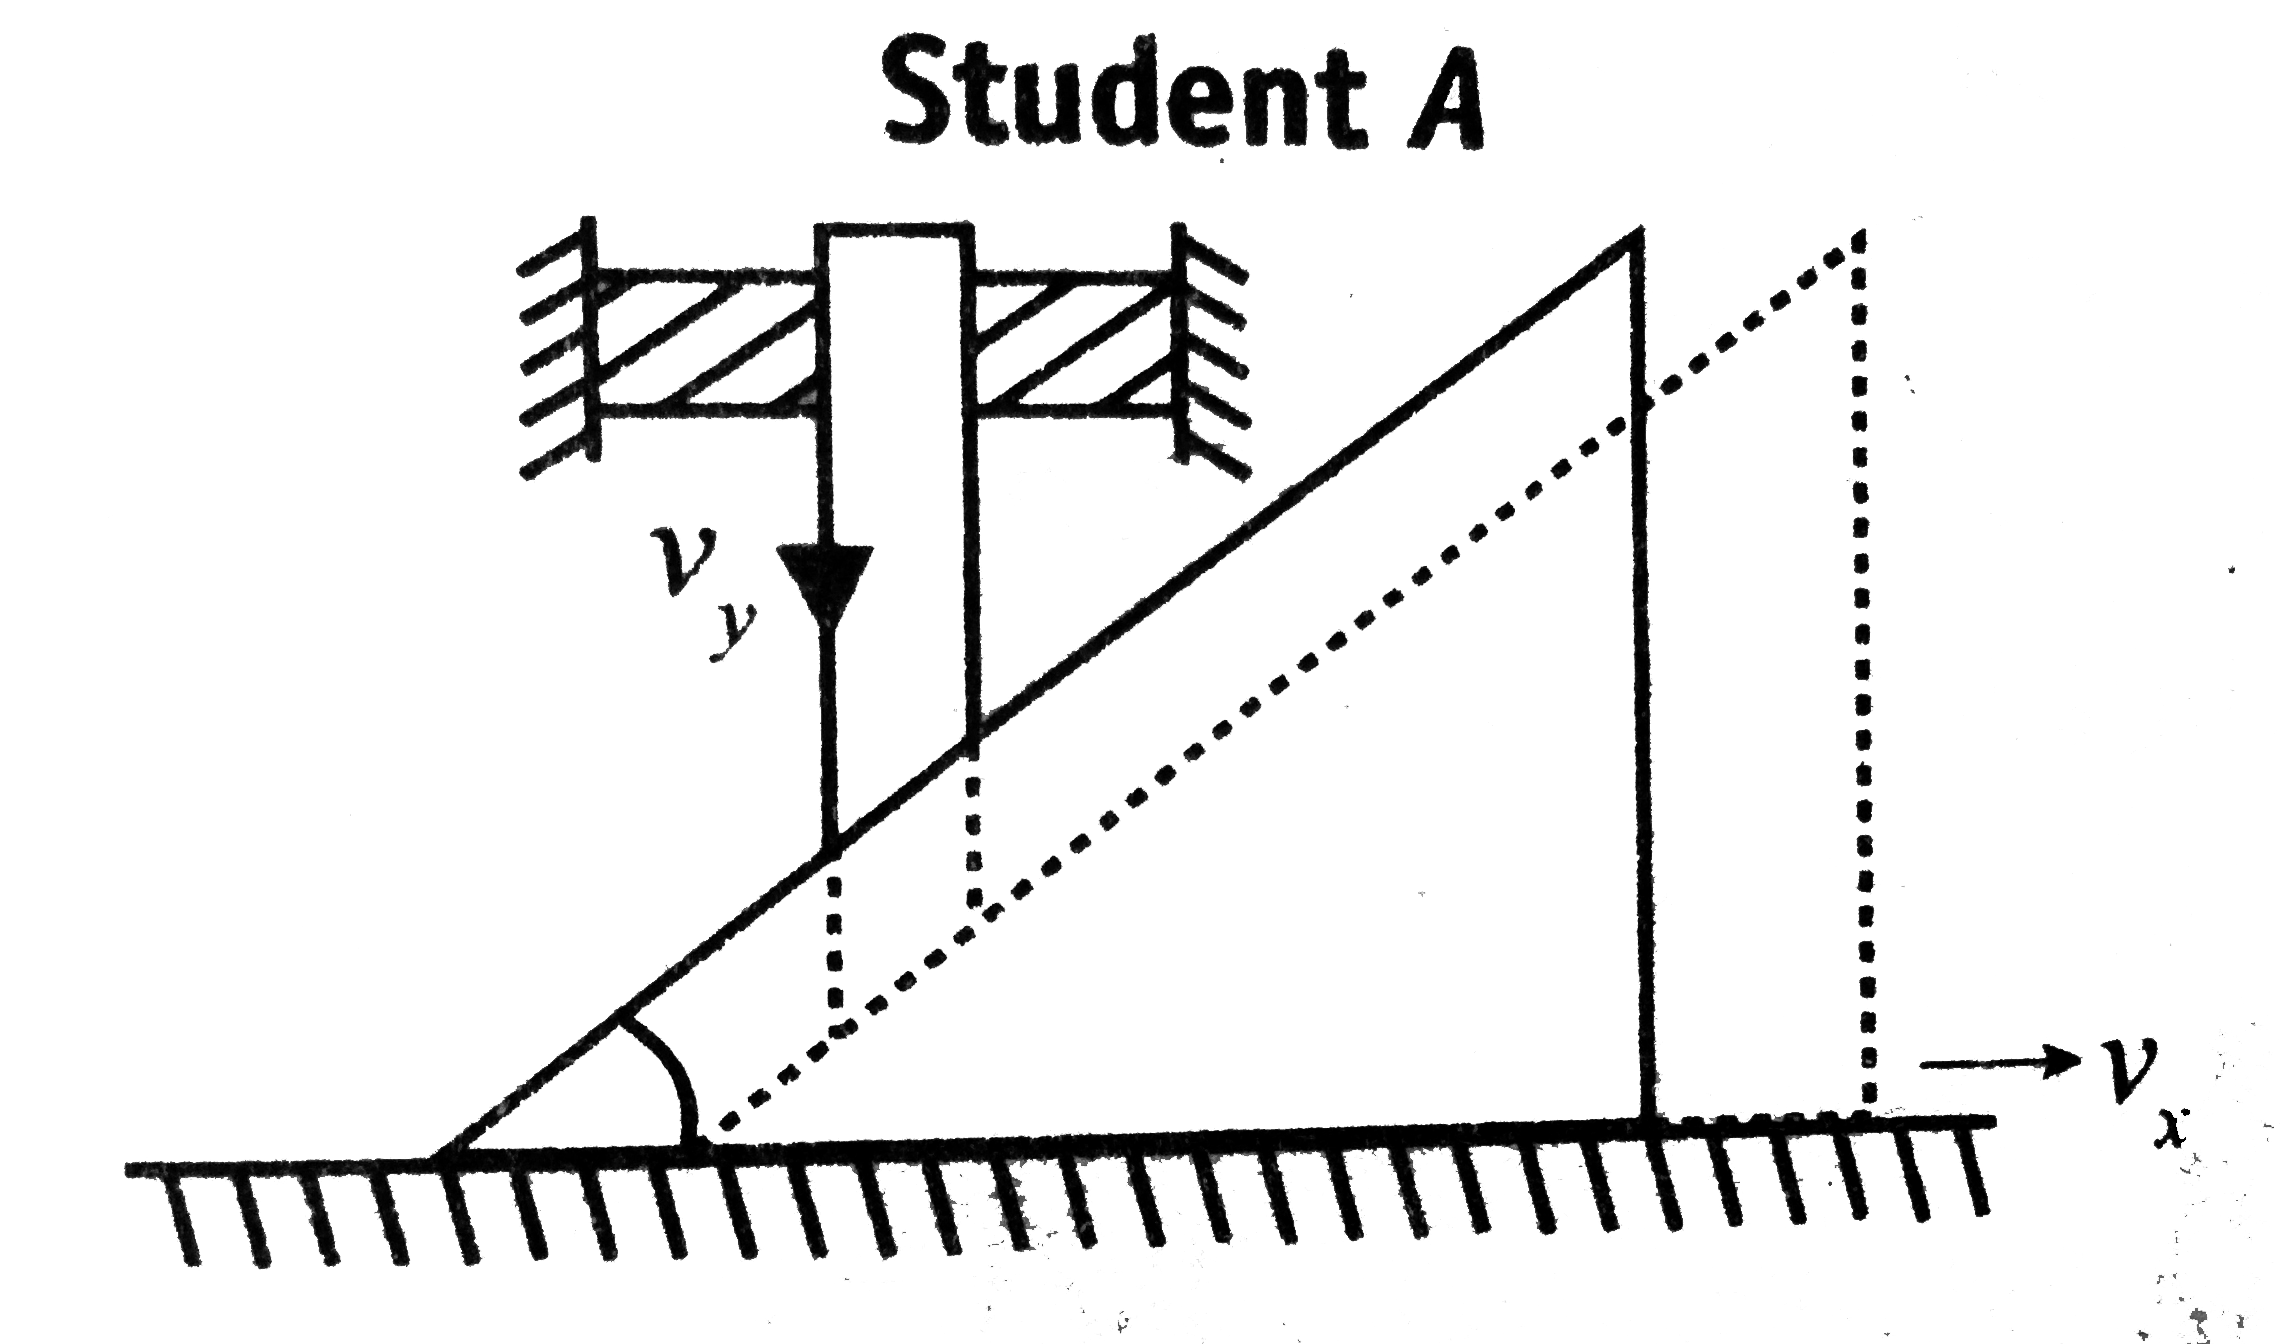 Two students analysed two different problems off mechanics involving constraint motion. Symbols have their usual meaning.      The vertical rod can move only vertically and the wedge can move only horizontally.   y/x=tantheta, y=x tan theta, v(y)=v(x)tantheta   Student B.   The ends of the rods are slipping on the ground and the wall, respectively   y/x=tantheta, y=xtantheta, vy=vxtantheta